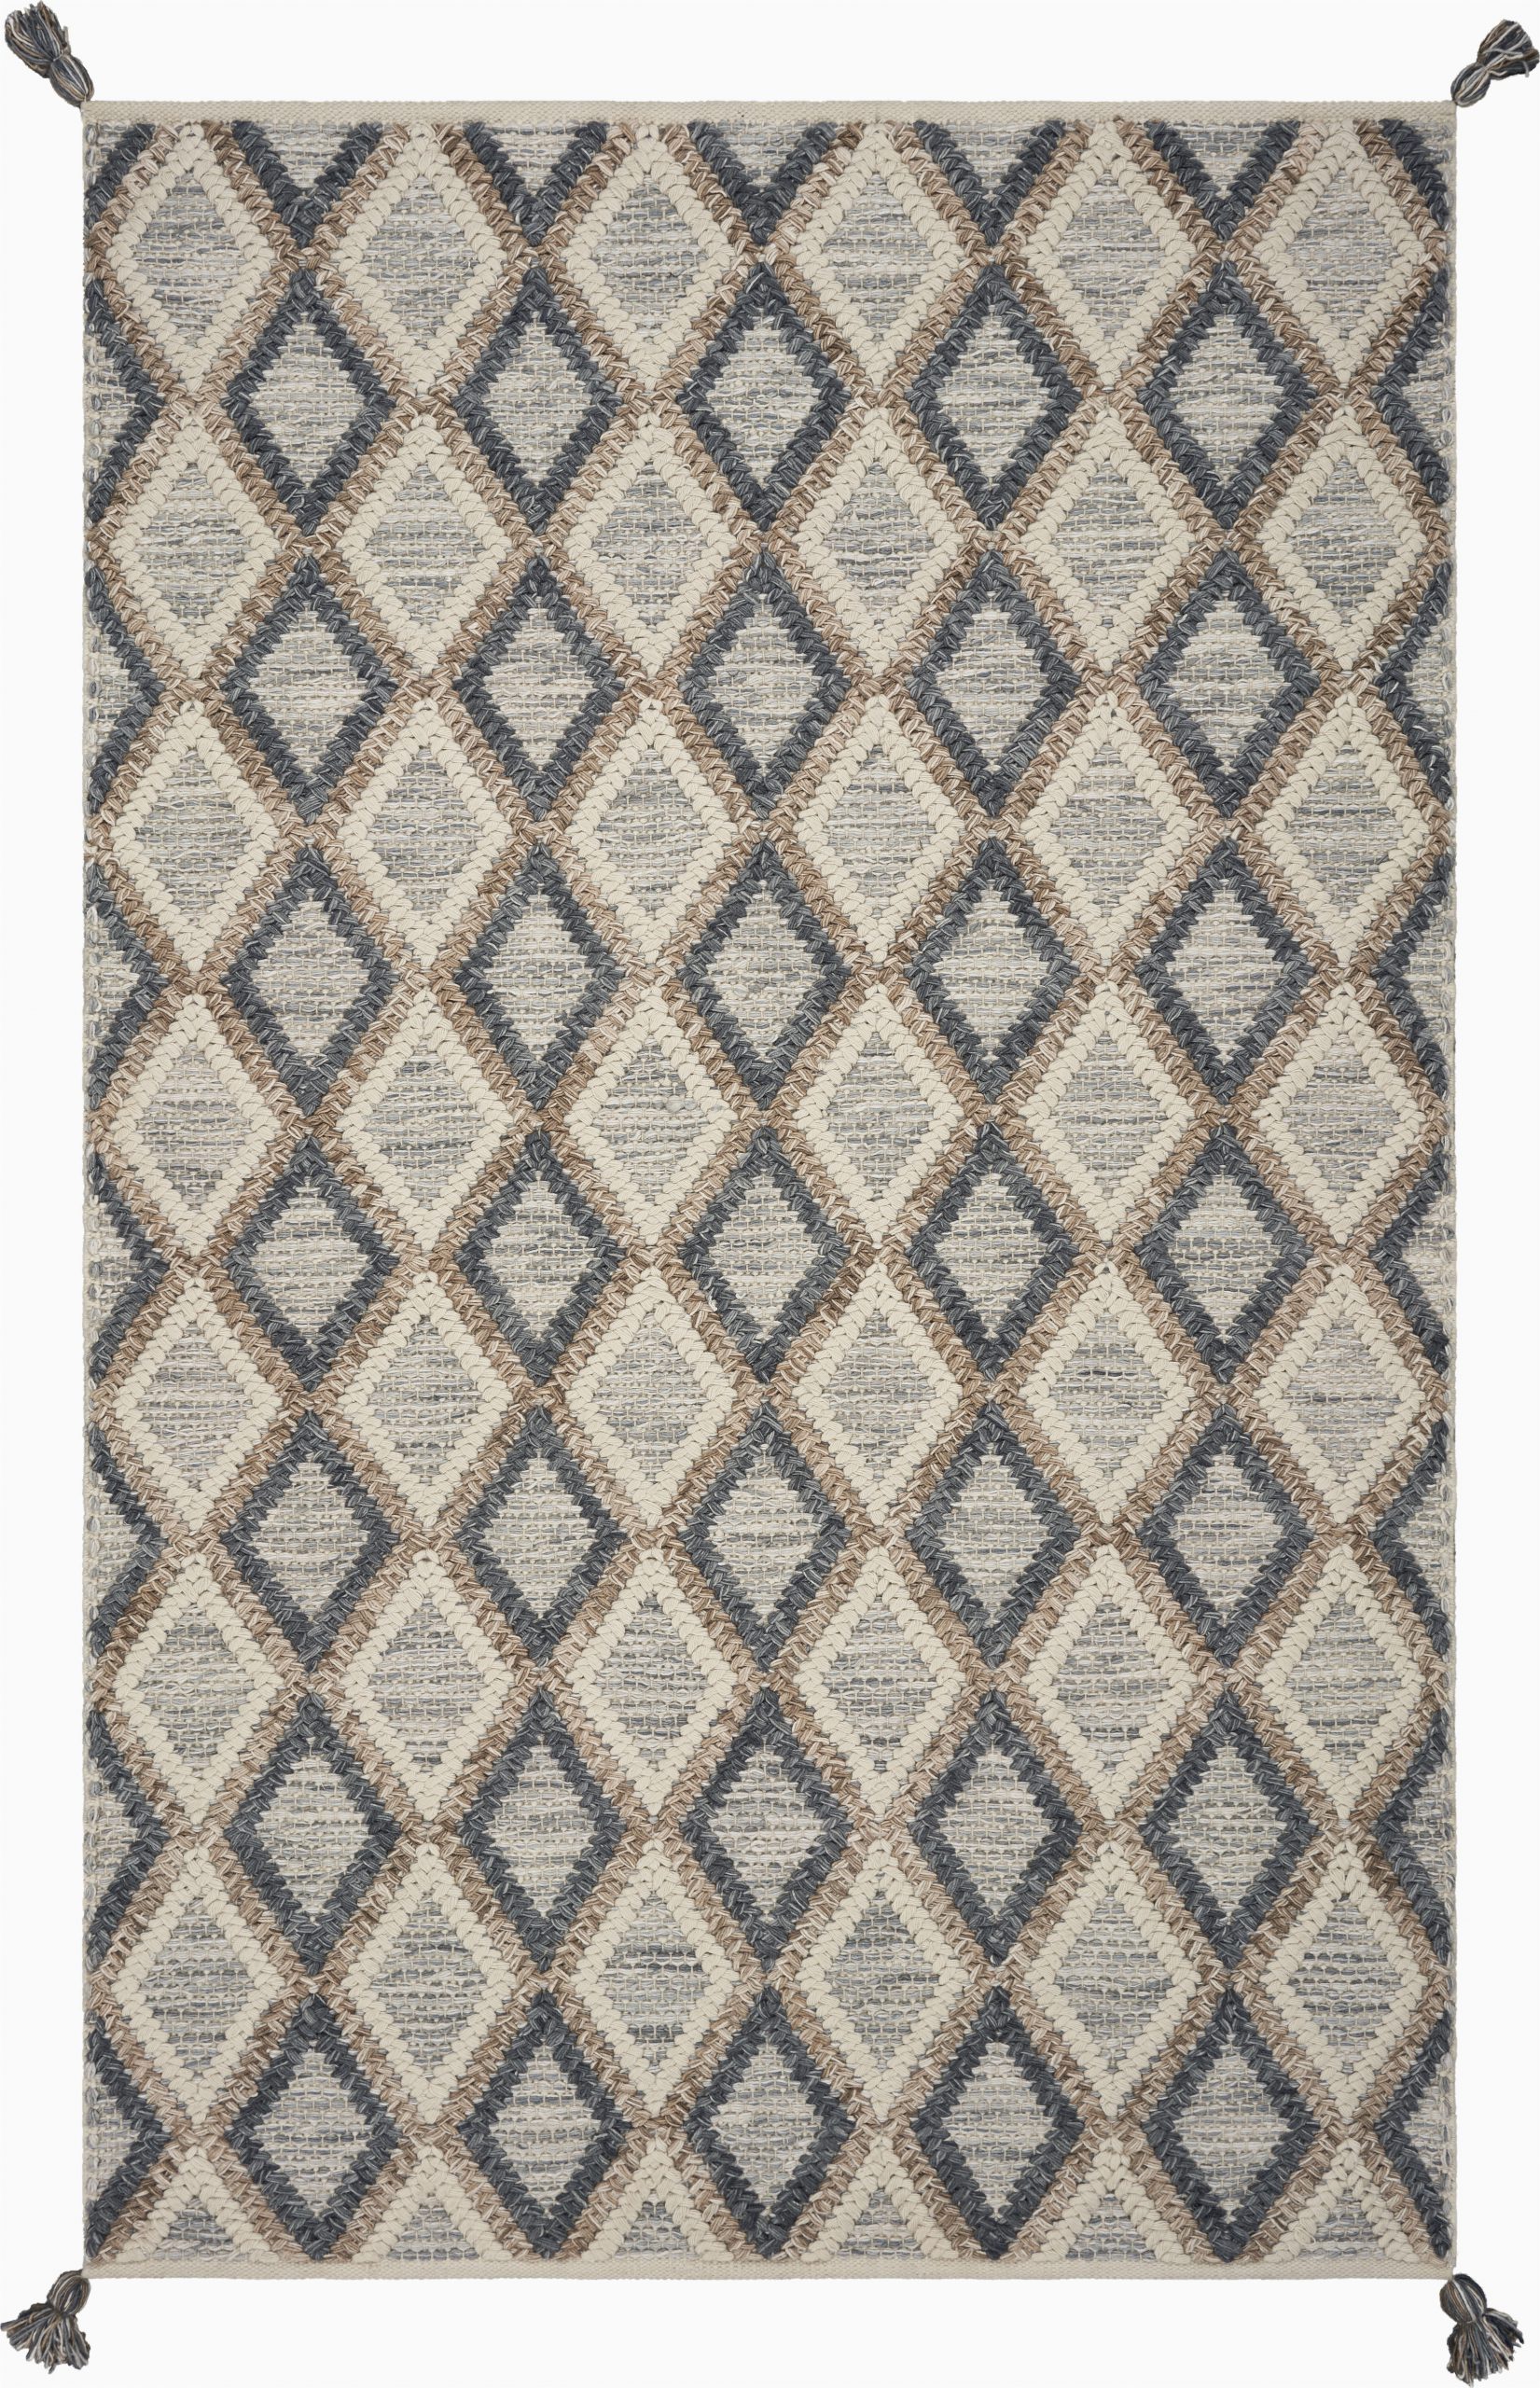 Area Rugs Tan and Gray Armentrout Geometric Handwoven Flatweave Light Gray Tan area Rug